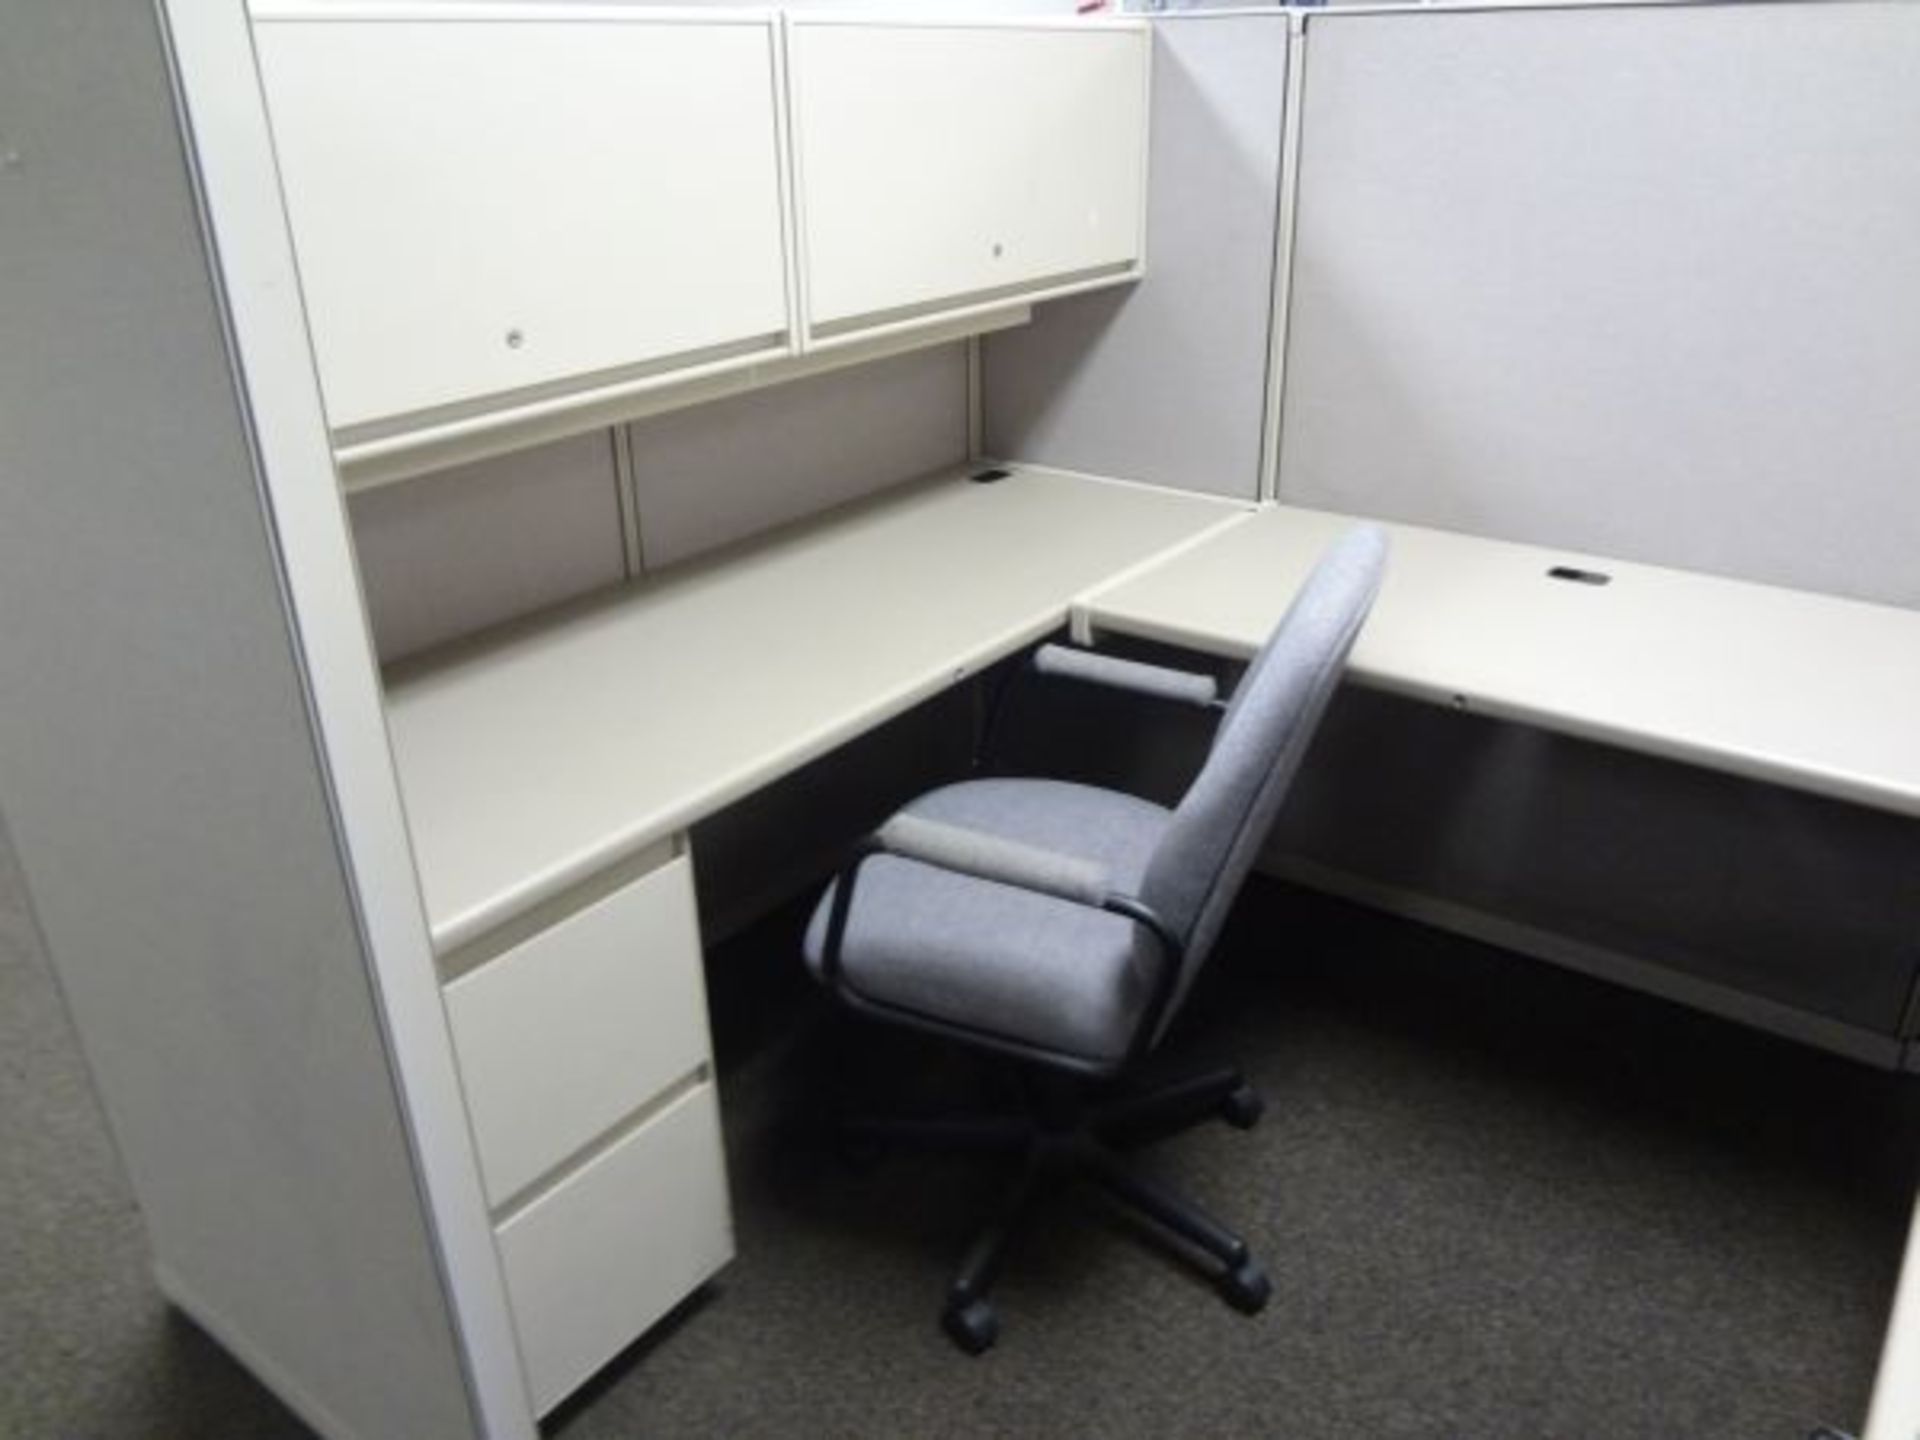 75" X 98" X 61" TWO-PERSON STEELCASE MODULAR OFFICE INCLUDING (2) OVERHEAD CABINETS, (1) 3-DRAWER - Image 3 of 3